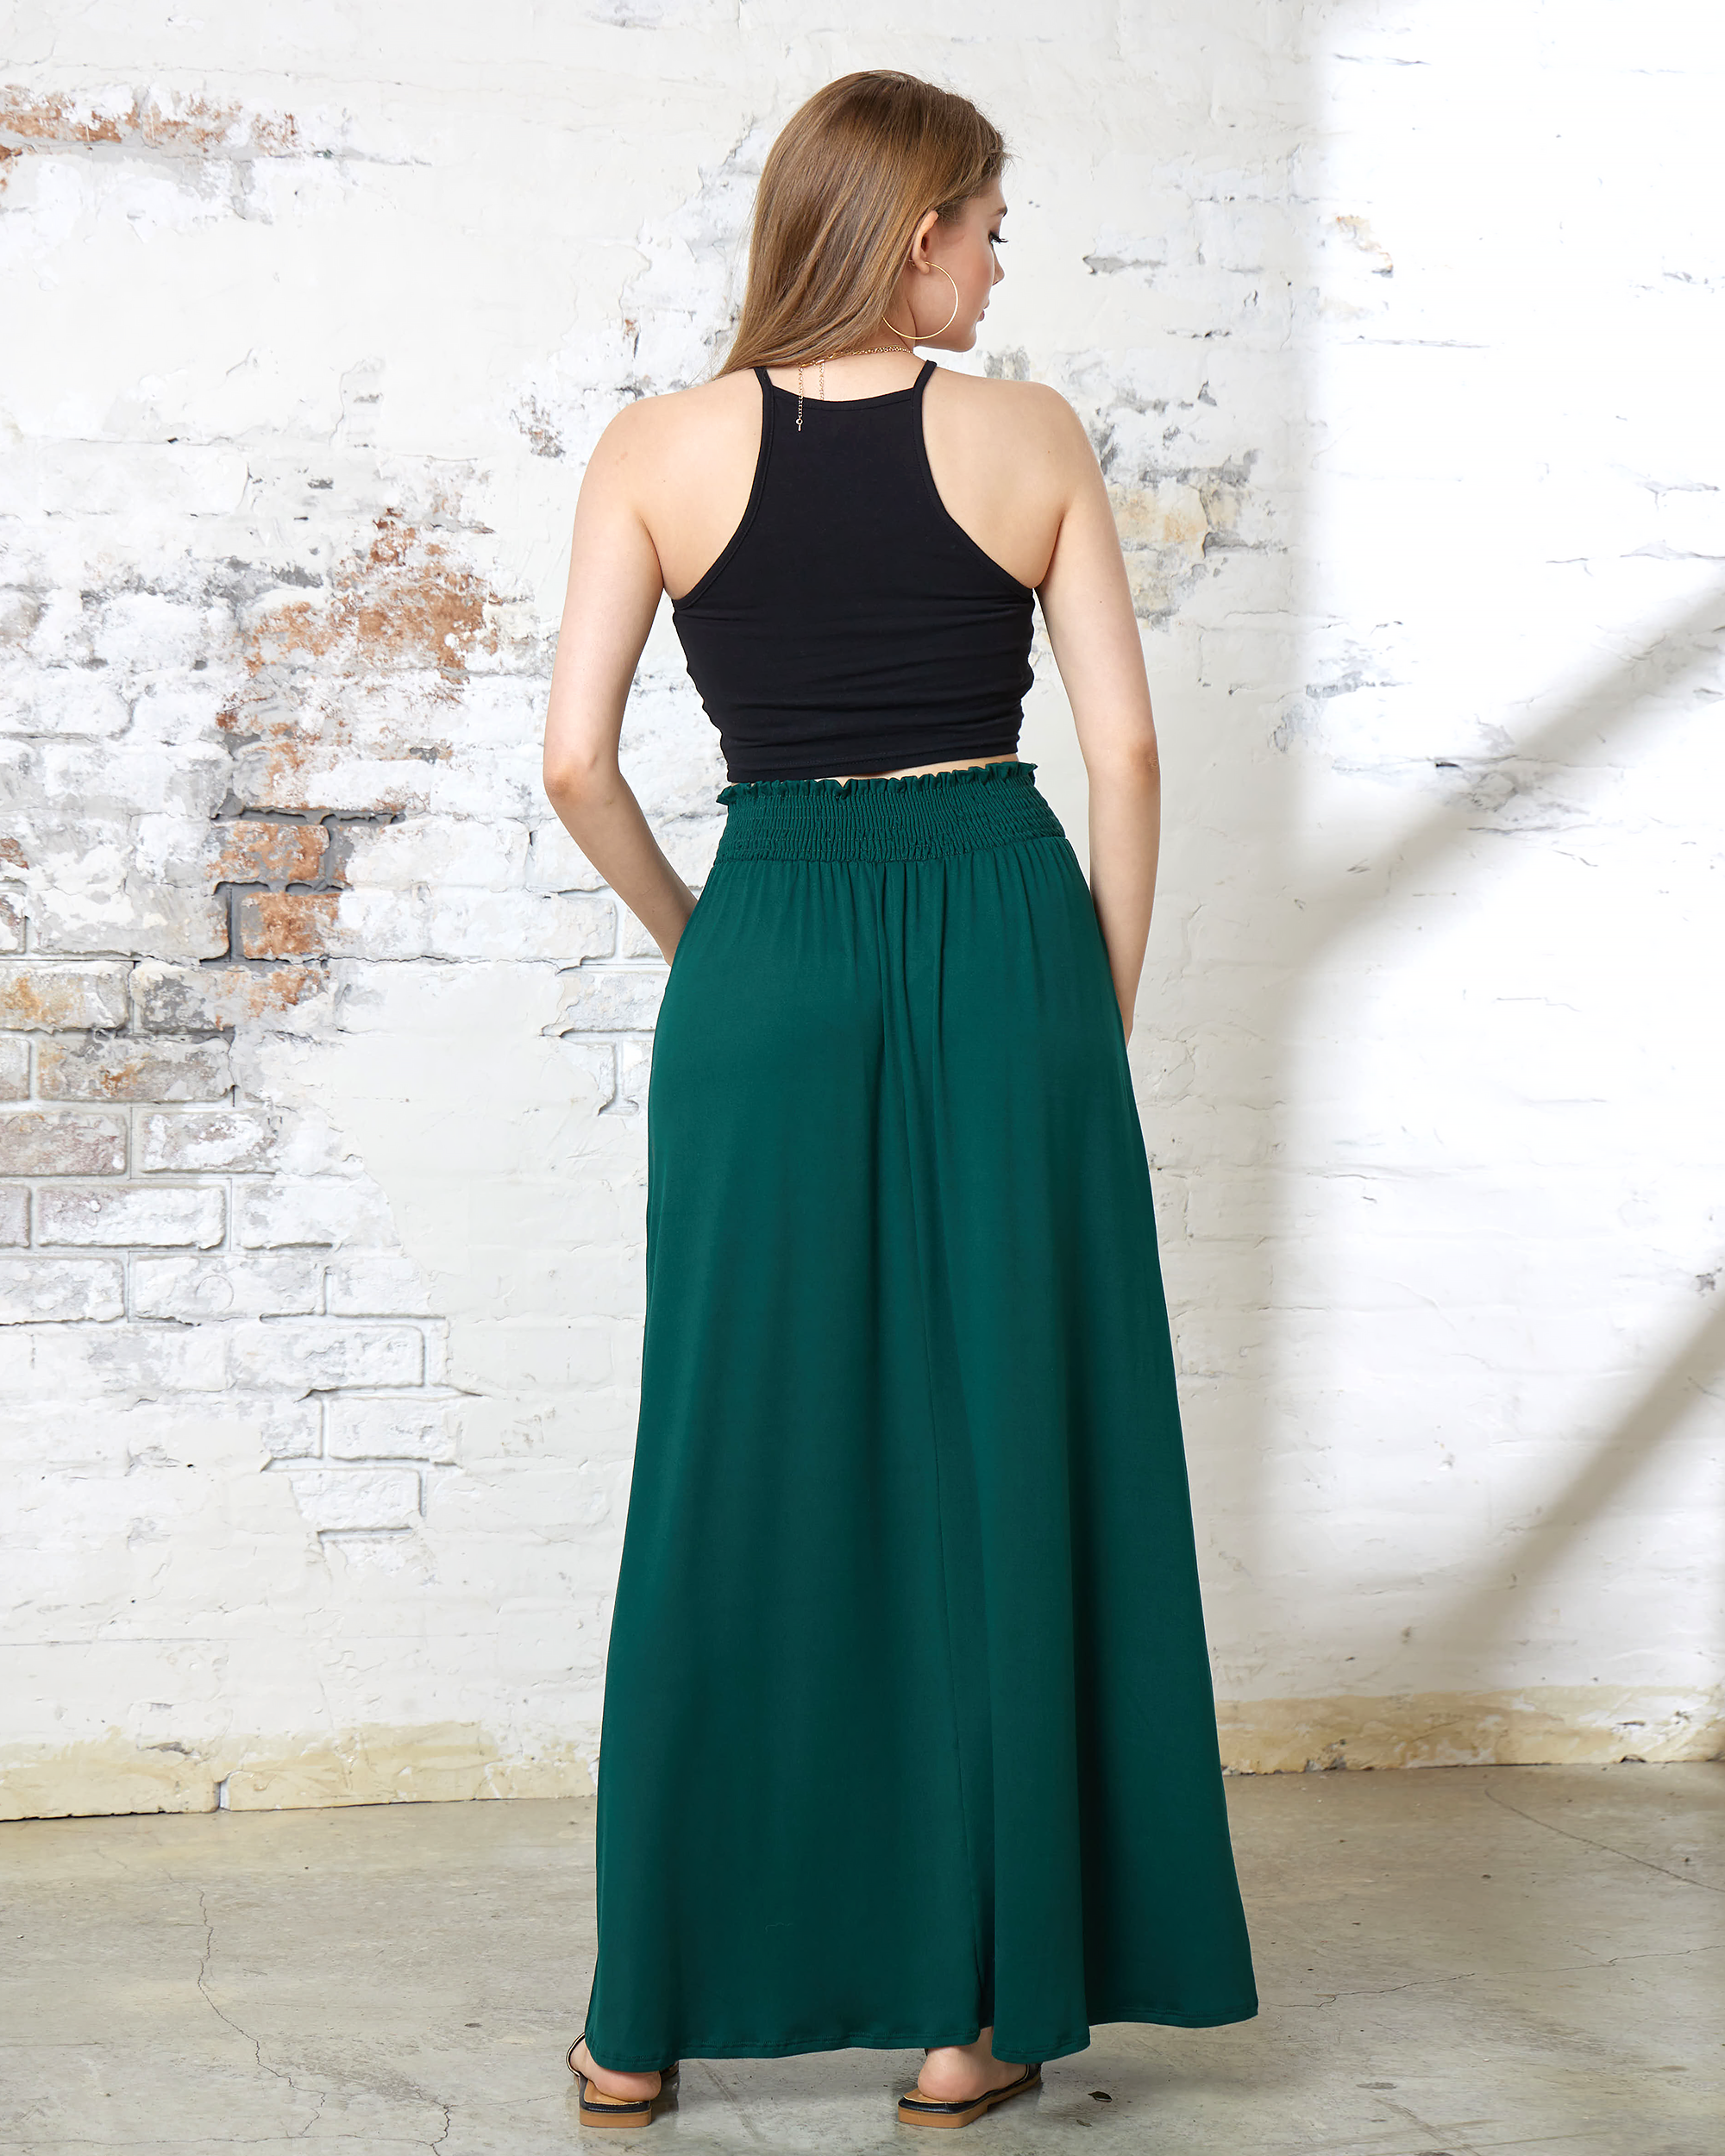 Hunter Green Maxi Skirt - Smocked Waist & Patched Pockets